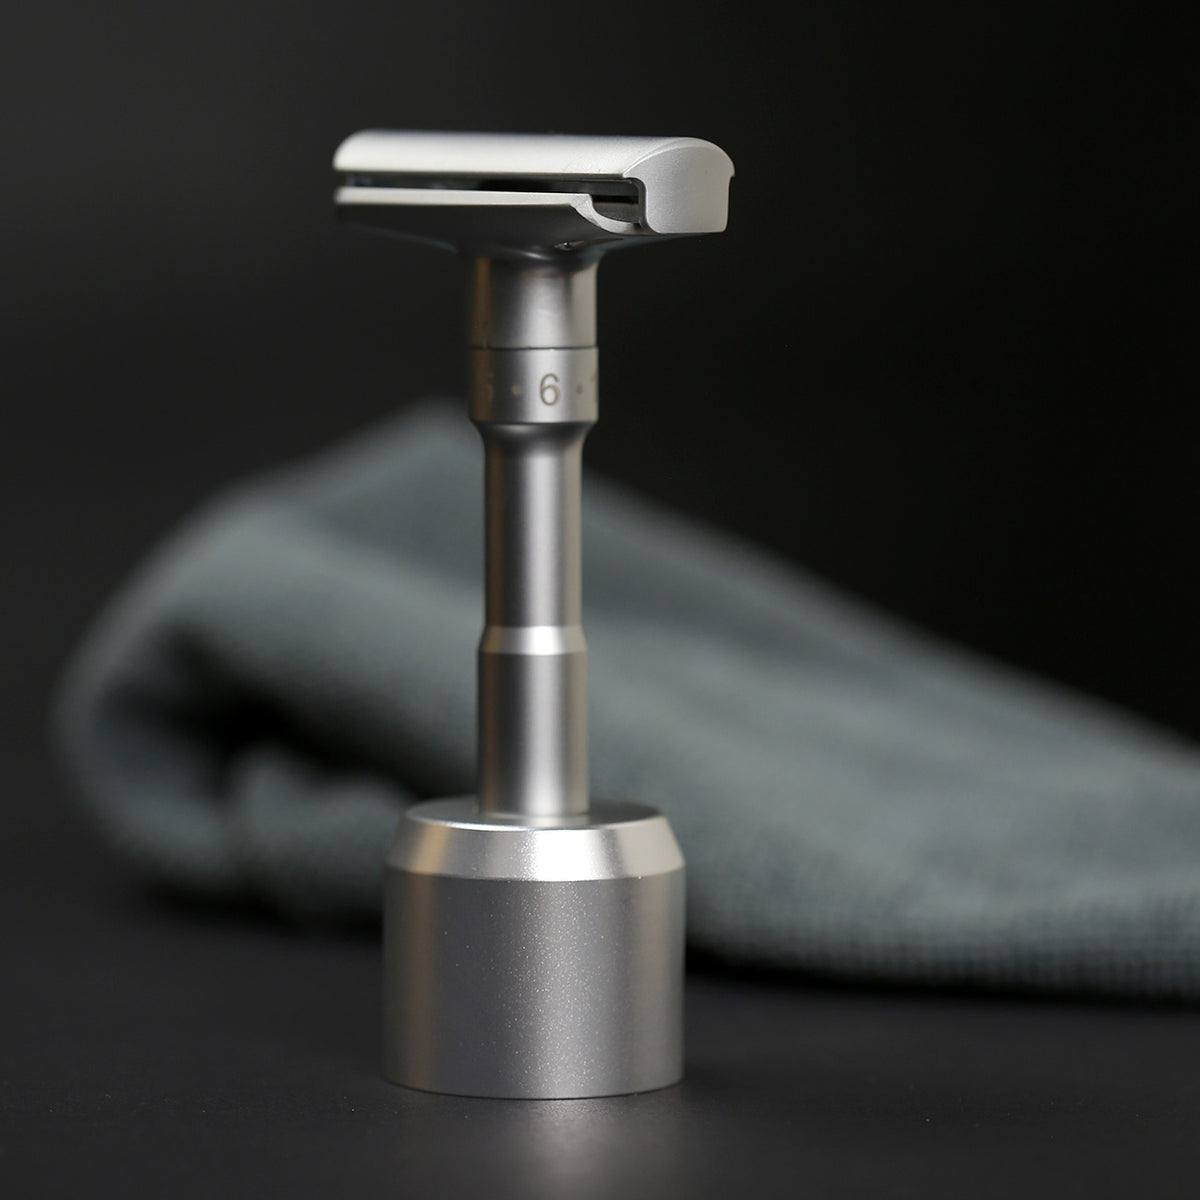 Adjustable saftey razor showing the number 6 setting, in its matching matt chrome stand in a dark setting with dark grey towel.